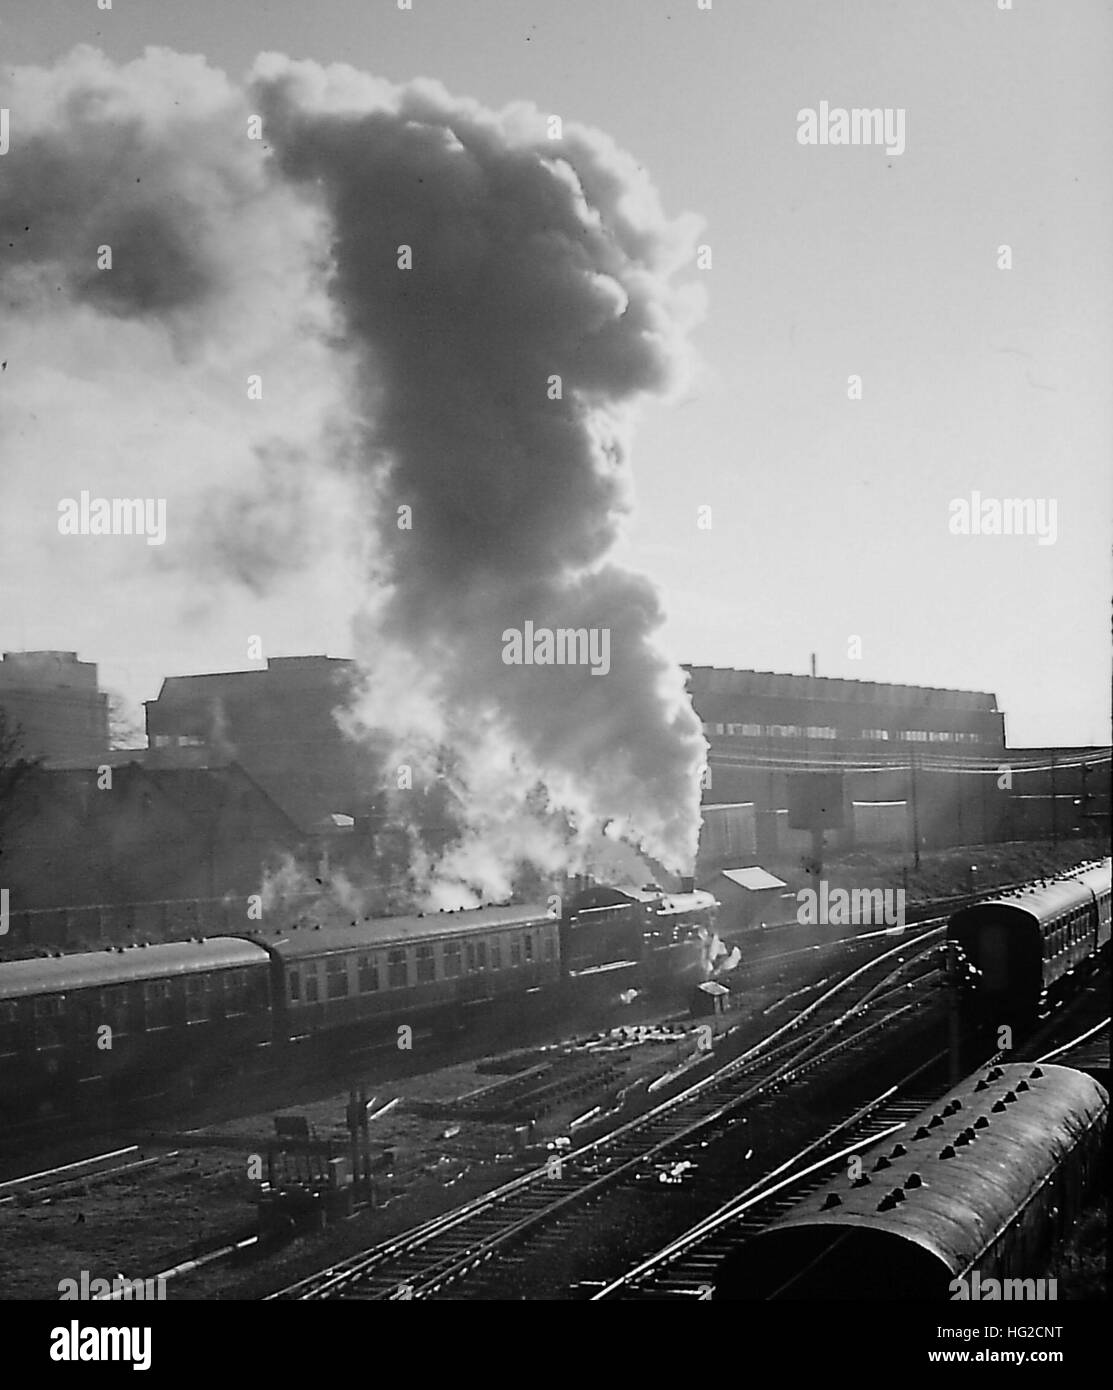 Iconic image of the Steam Railway in Britain Stock Photo